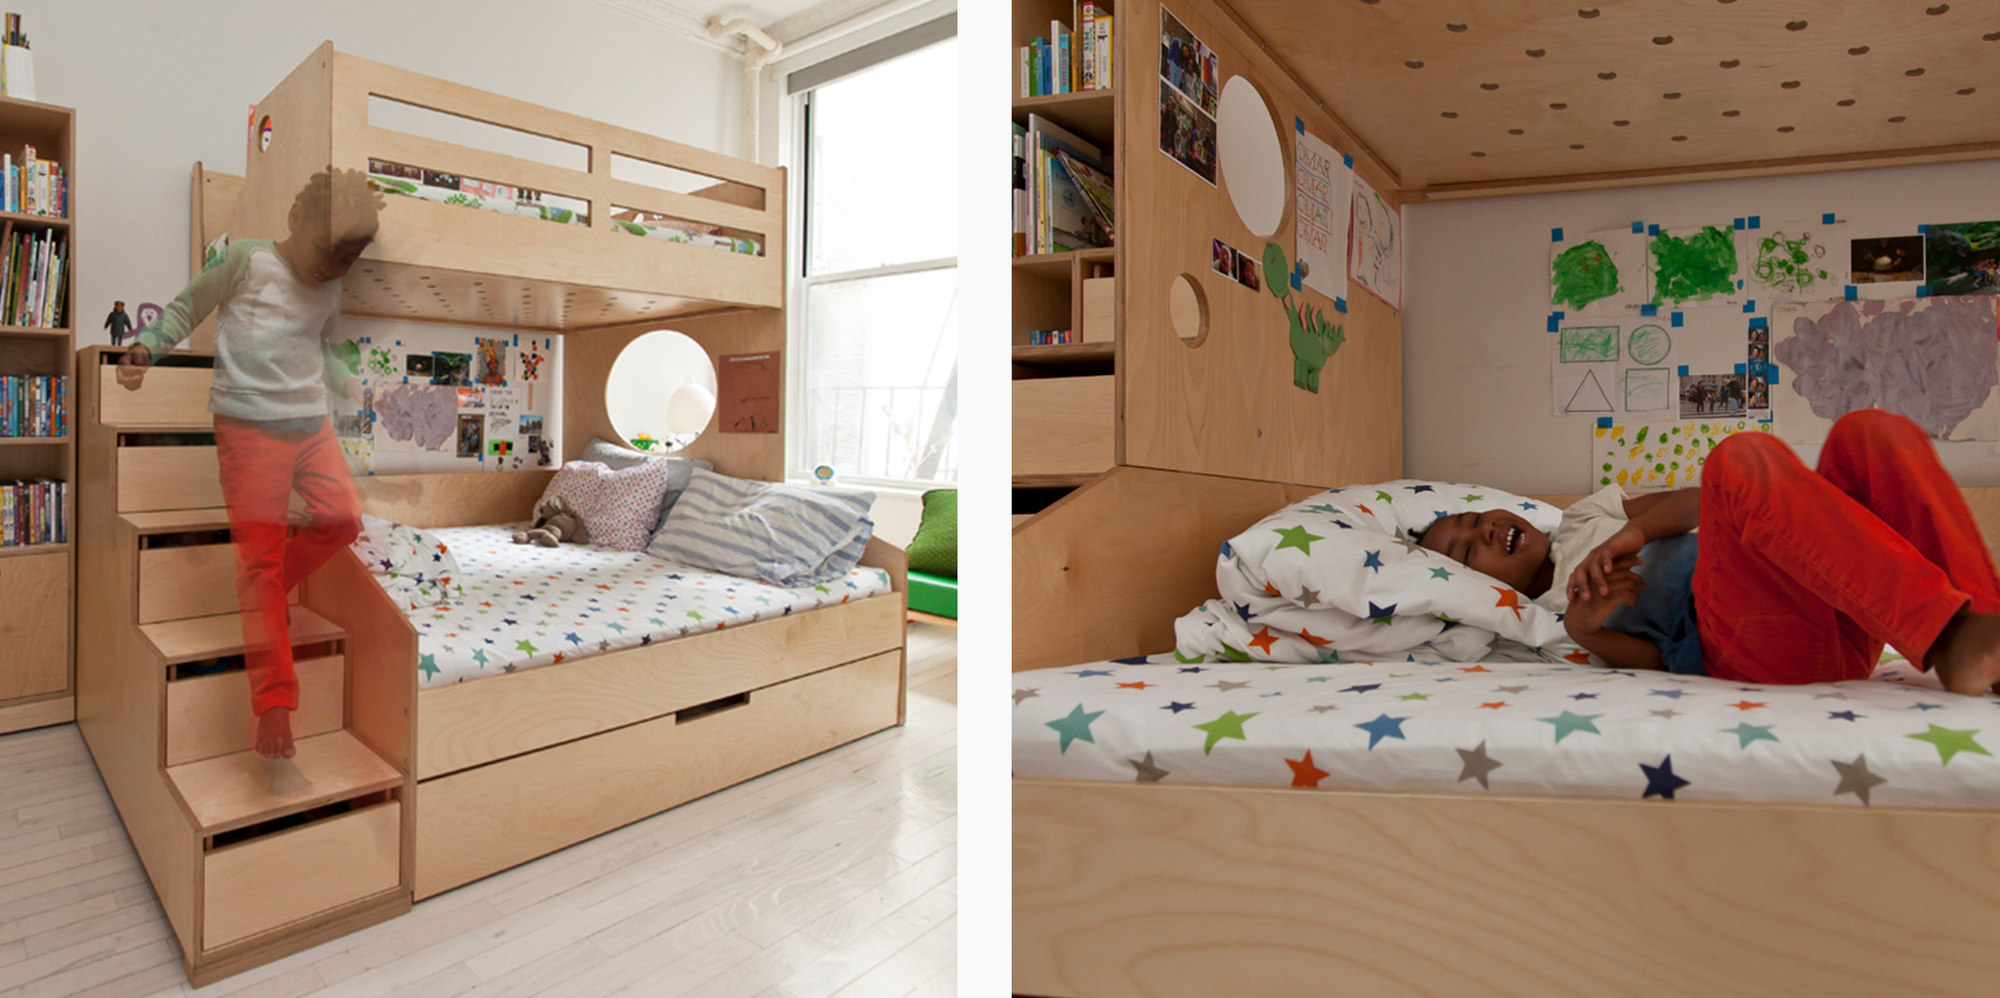 What Mattress Should You Use For A Bunk Bed?